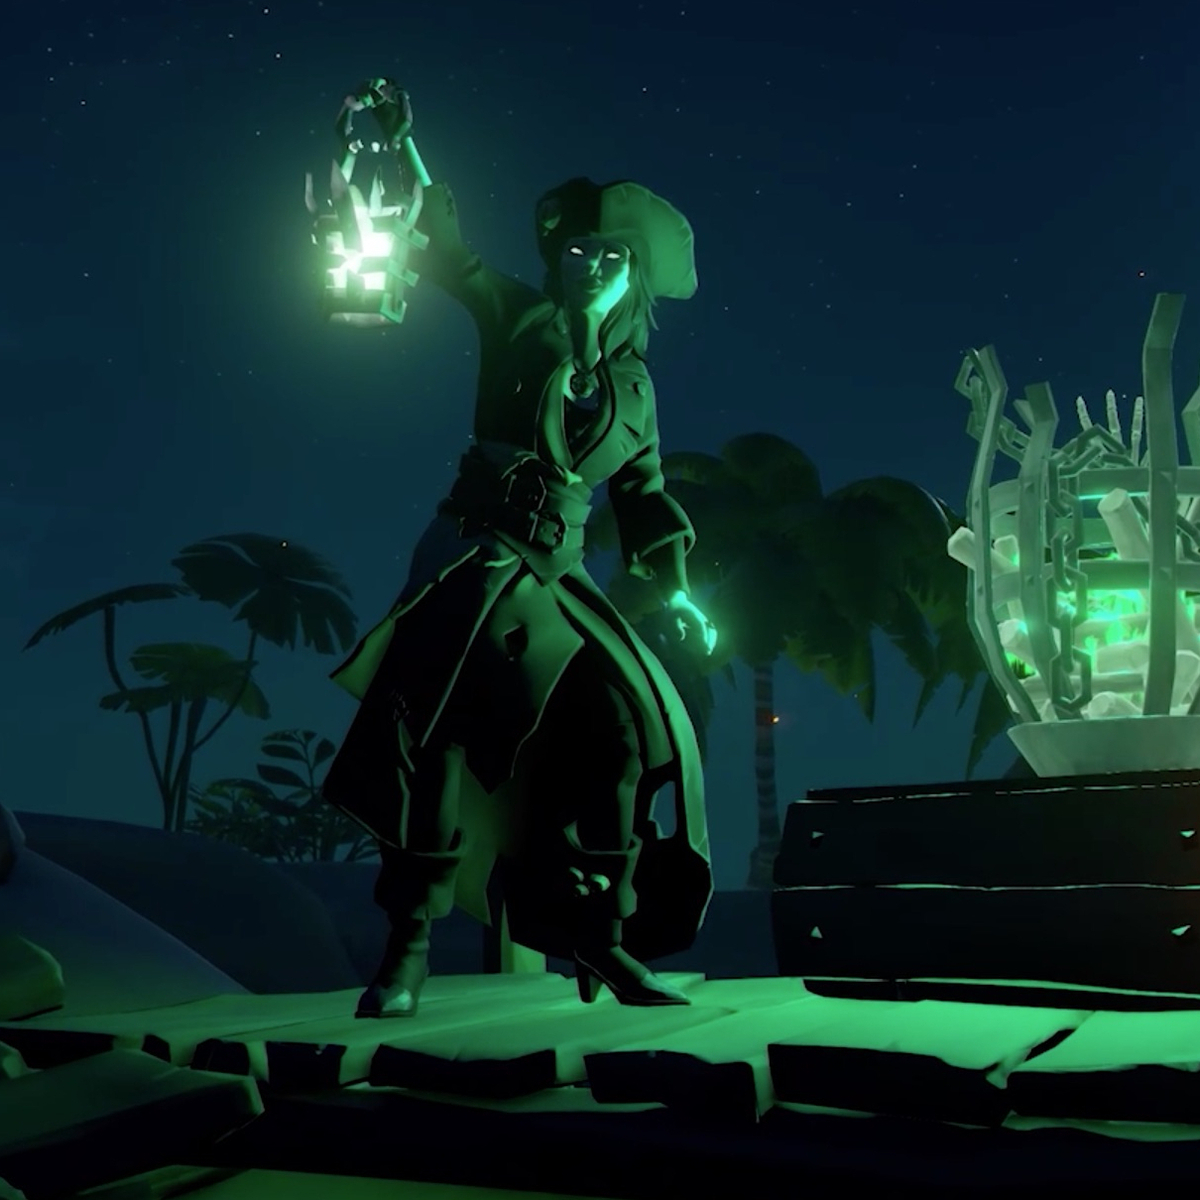 The Forsaken Hunter, the Newest Adventure in Sea of Thieves Brings Mystery and a Masked Assailant